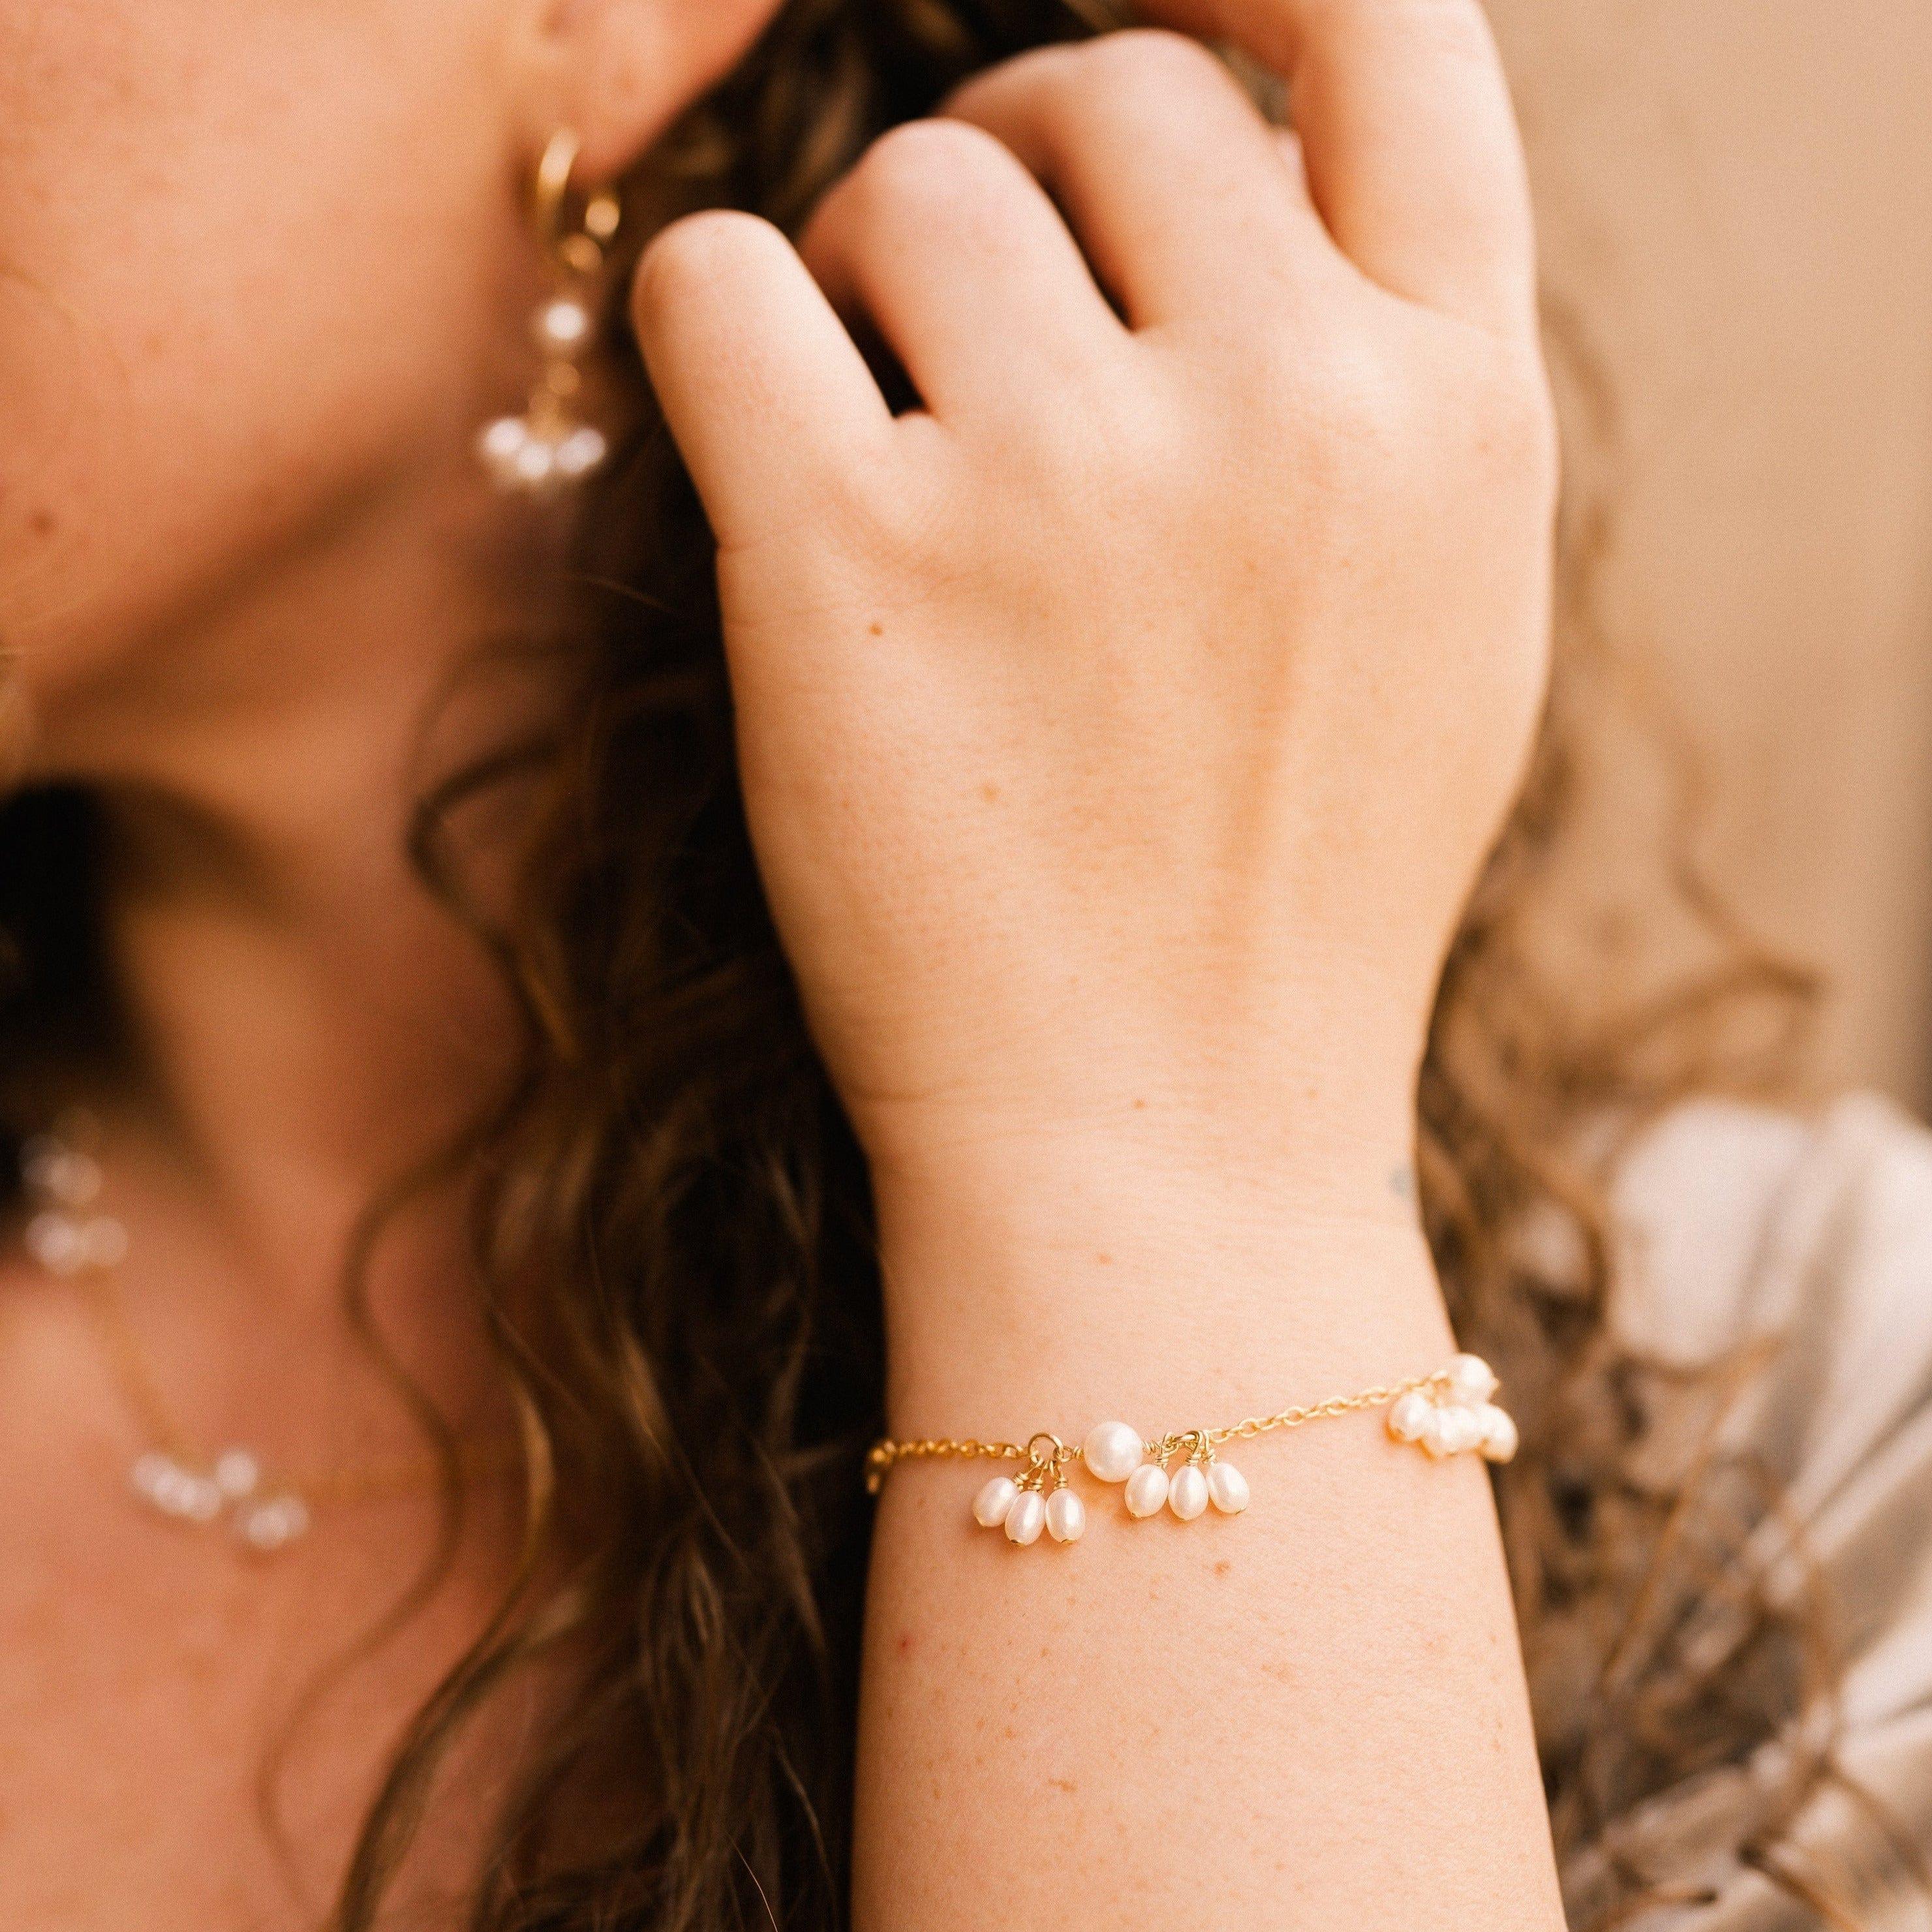 Pearl Blossom Bracelet - Nolia Jewelry - Meaningful + Sustainably Handcrafted Jewelry